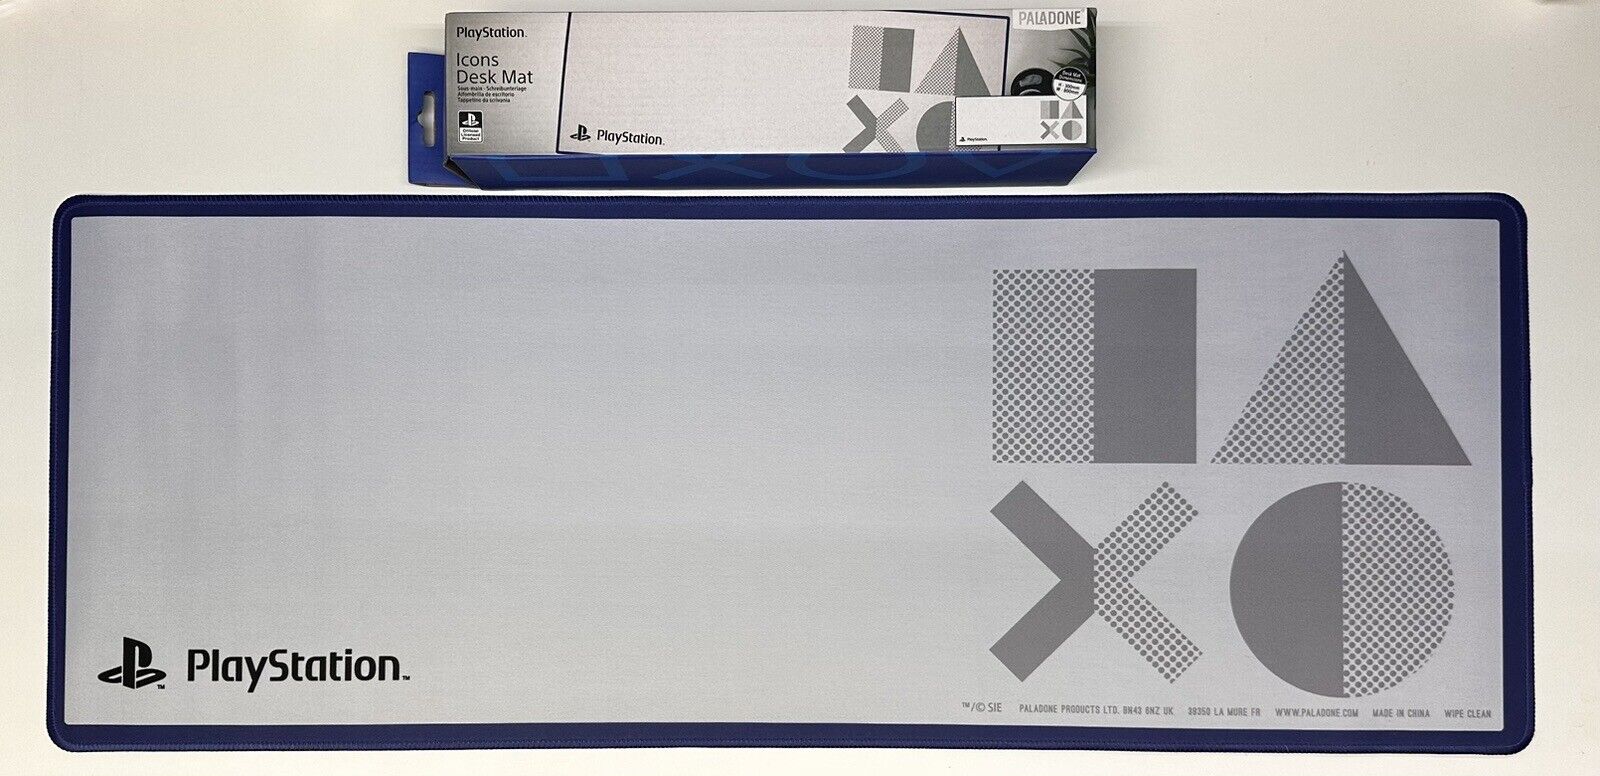 Playstation Icons Paladone Non-Slip Desk Mat 31.5” X 11.75” Brand New in Box